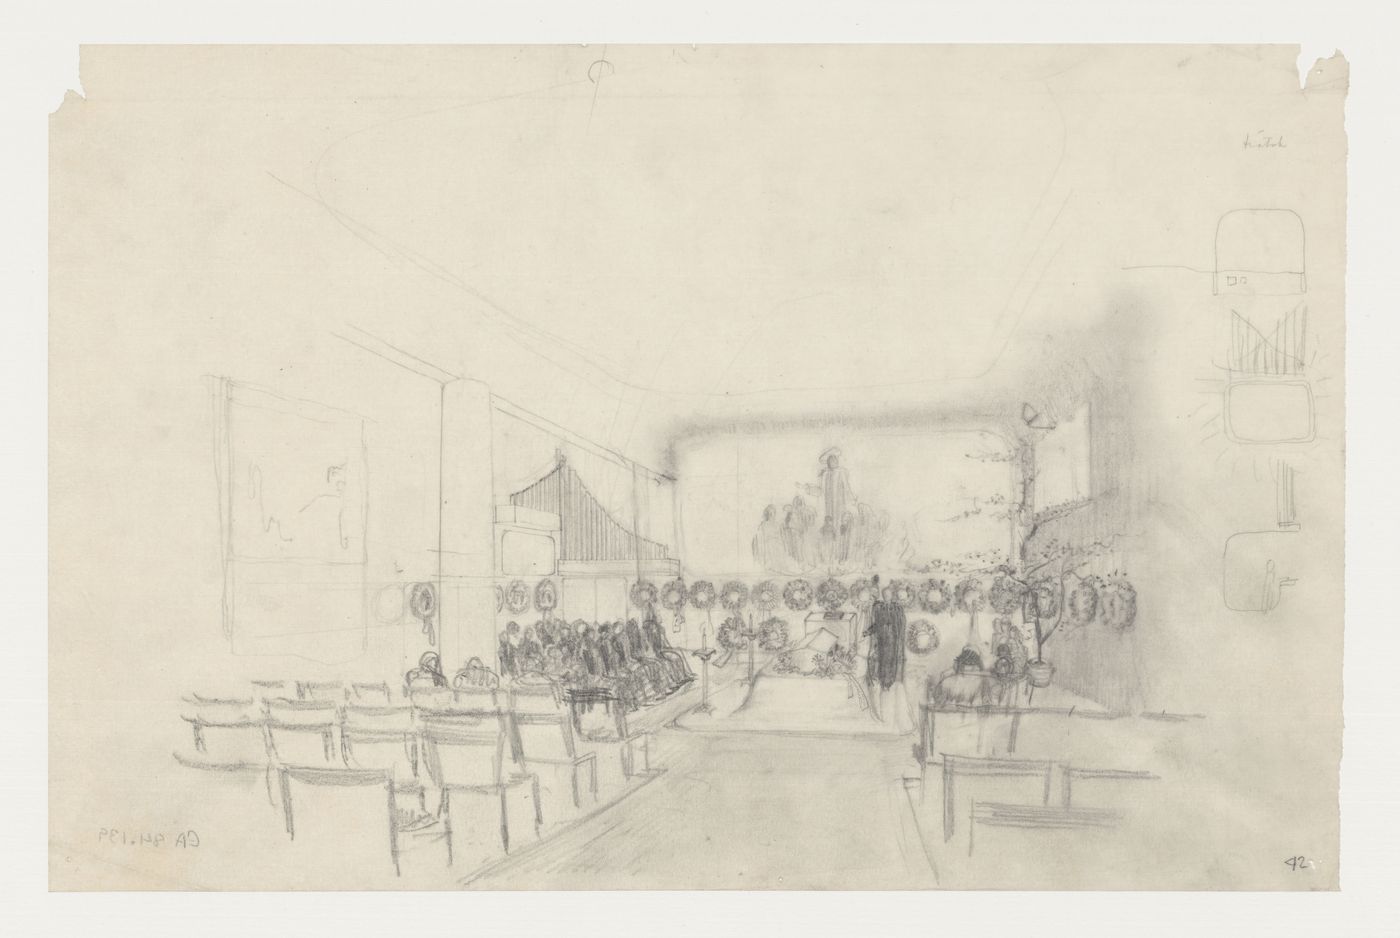 Interior sketch perspective for the Chapel of Faith showing a service underway, Woodland Crematorium, Woodland Cemetery, Stockholm, Sweden